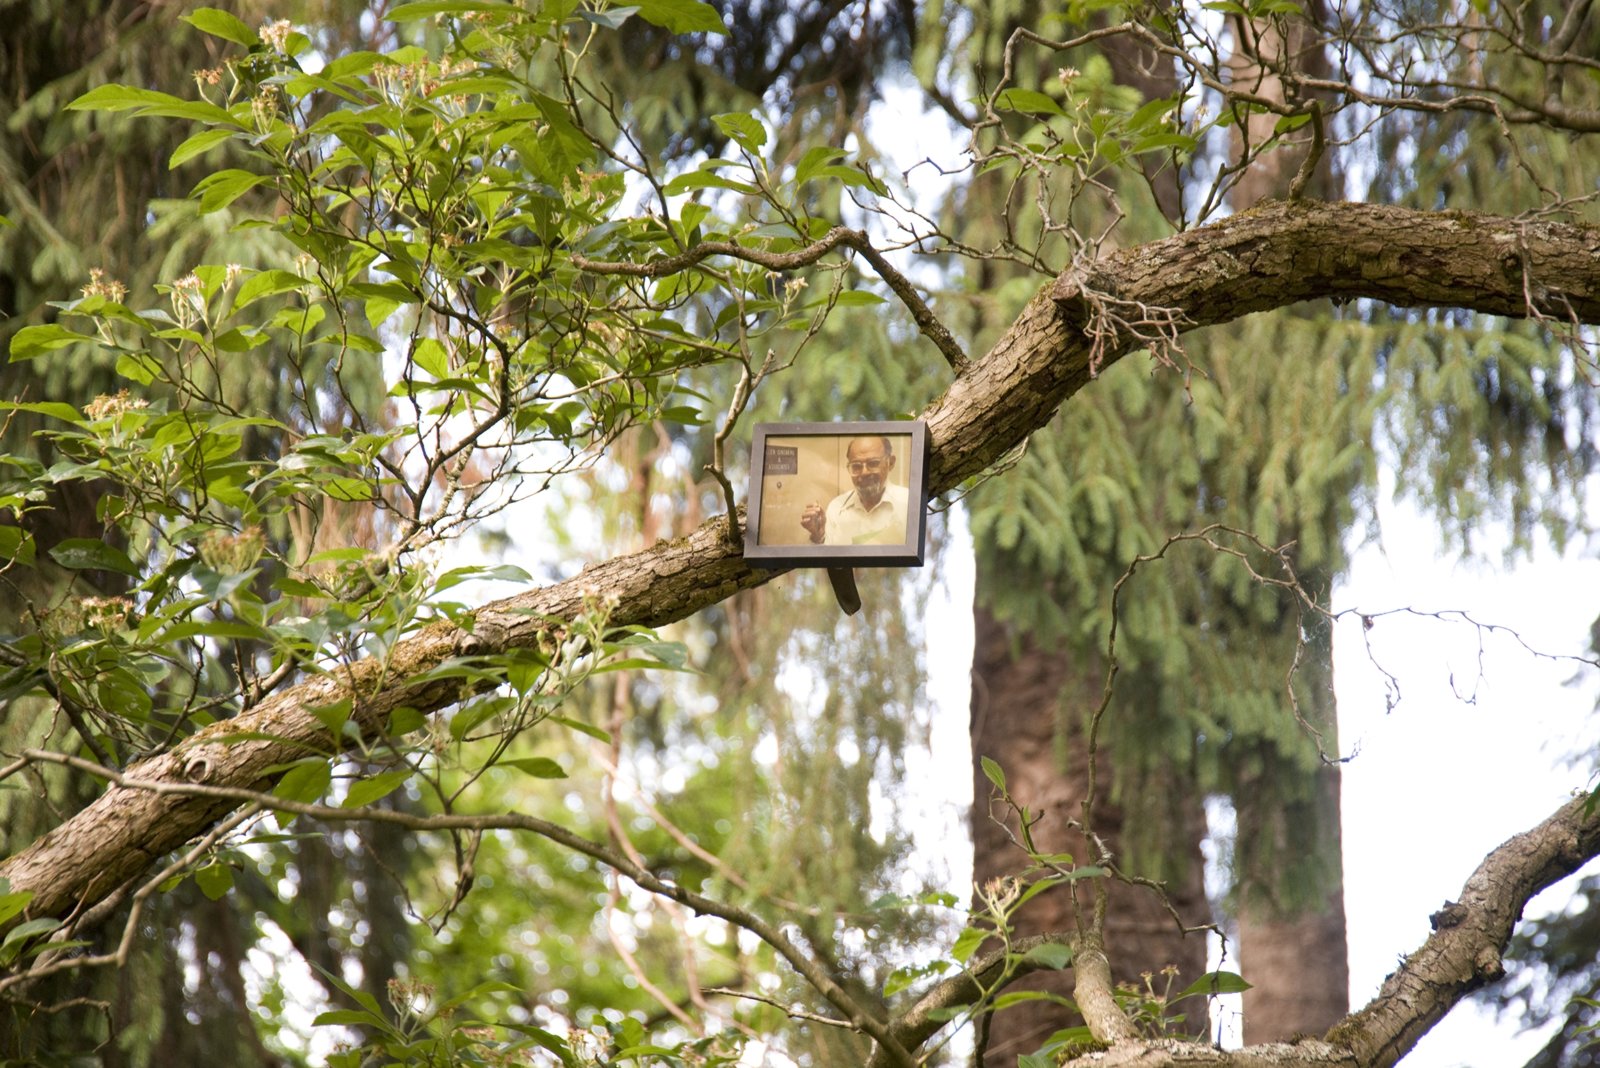 Geoffrey Farmer, If You Want To See Something Look at Something Else (Allen Ginsberg 1926–1997), 2011, 50 colour photographs mounted on perspex, framed, dimensions variable. Installation view, Volunteer Park, Seattle, USA, 2019